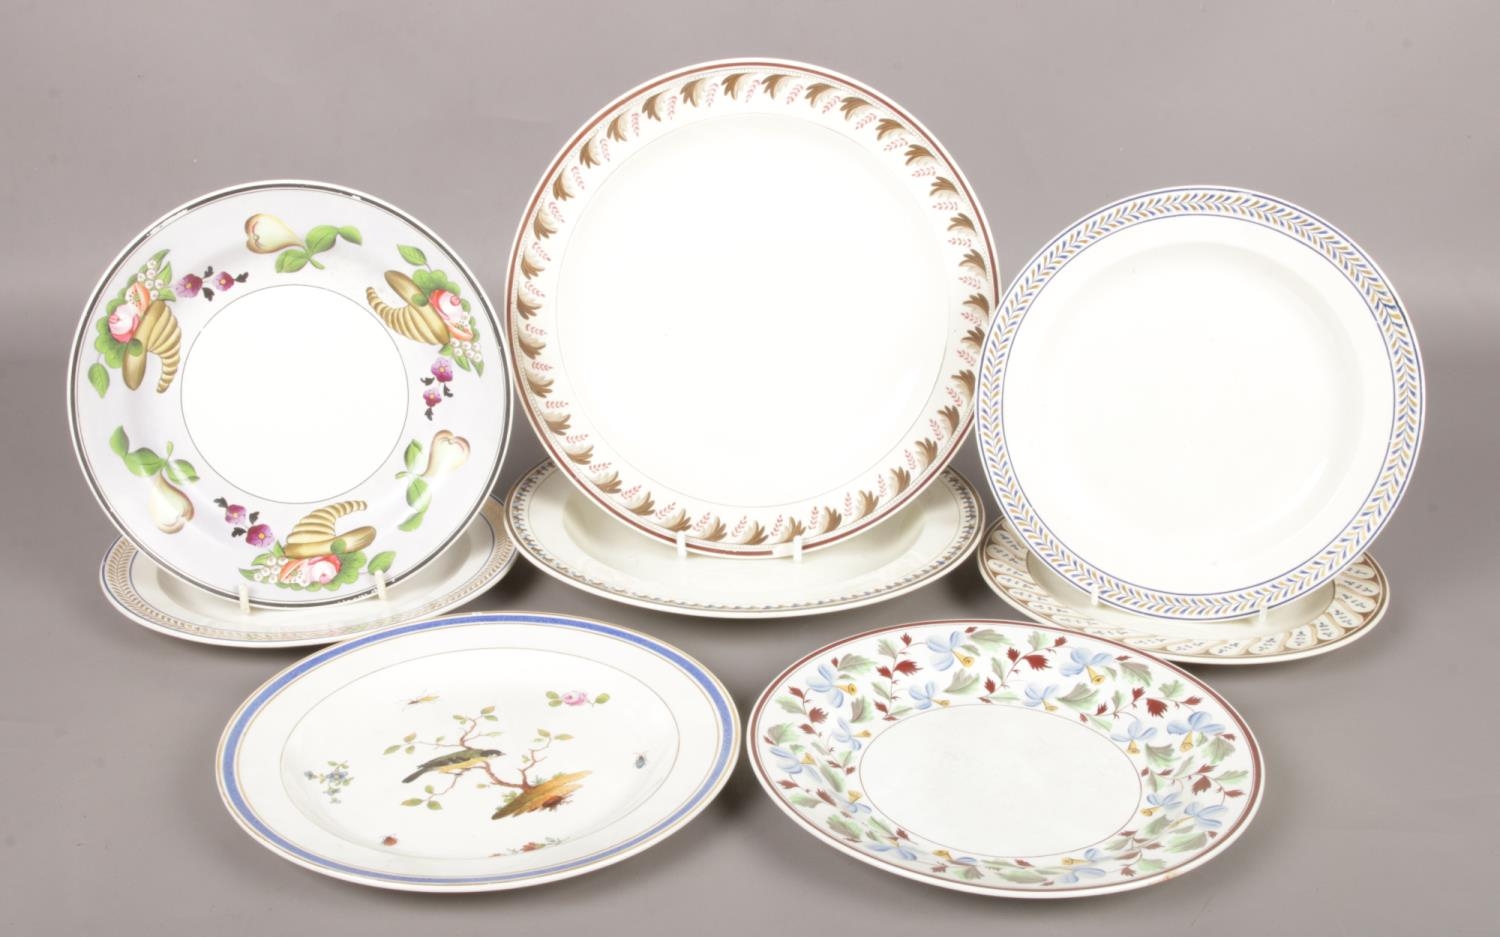 Eight early 19th century Wedgwood creamware plates. Includes example painted with a bird perched